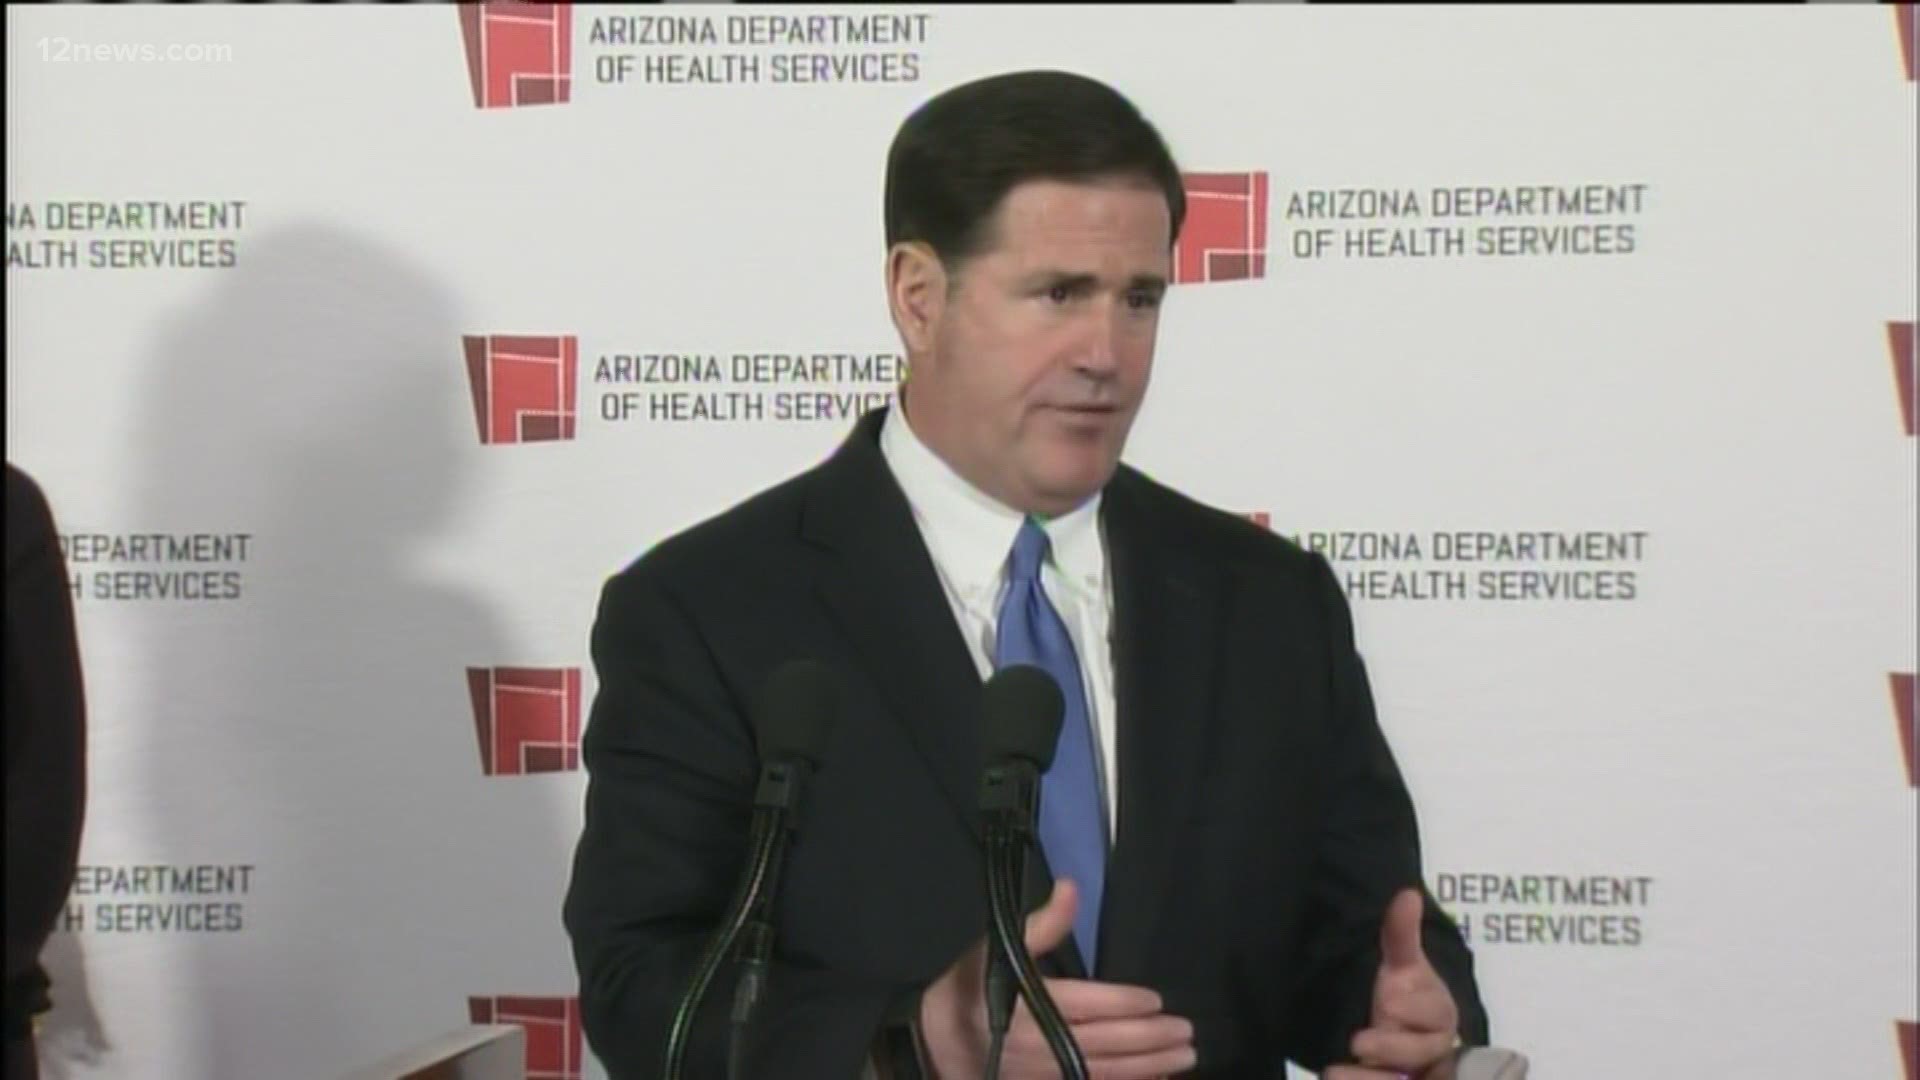 COVID-19 cases are surging in Arizona and predictive models say it's going to get worse. Gov. Ducey announced several executive orders to help stop the spread.